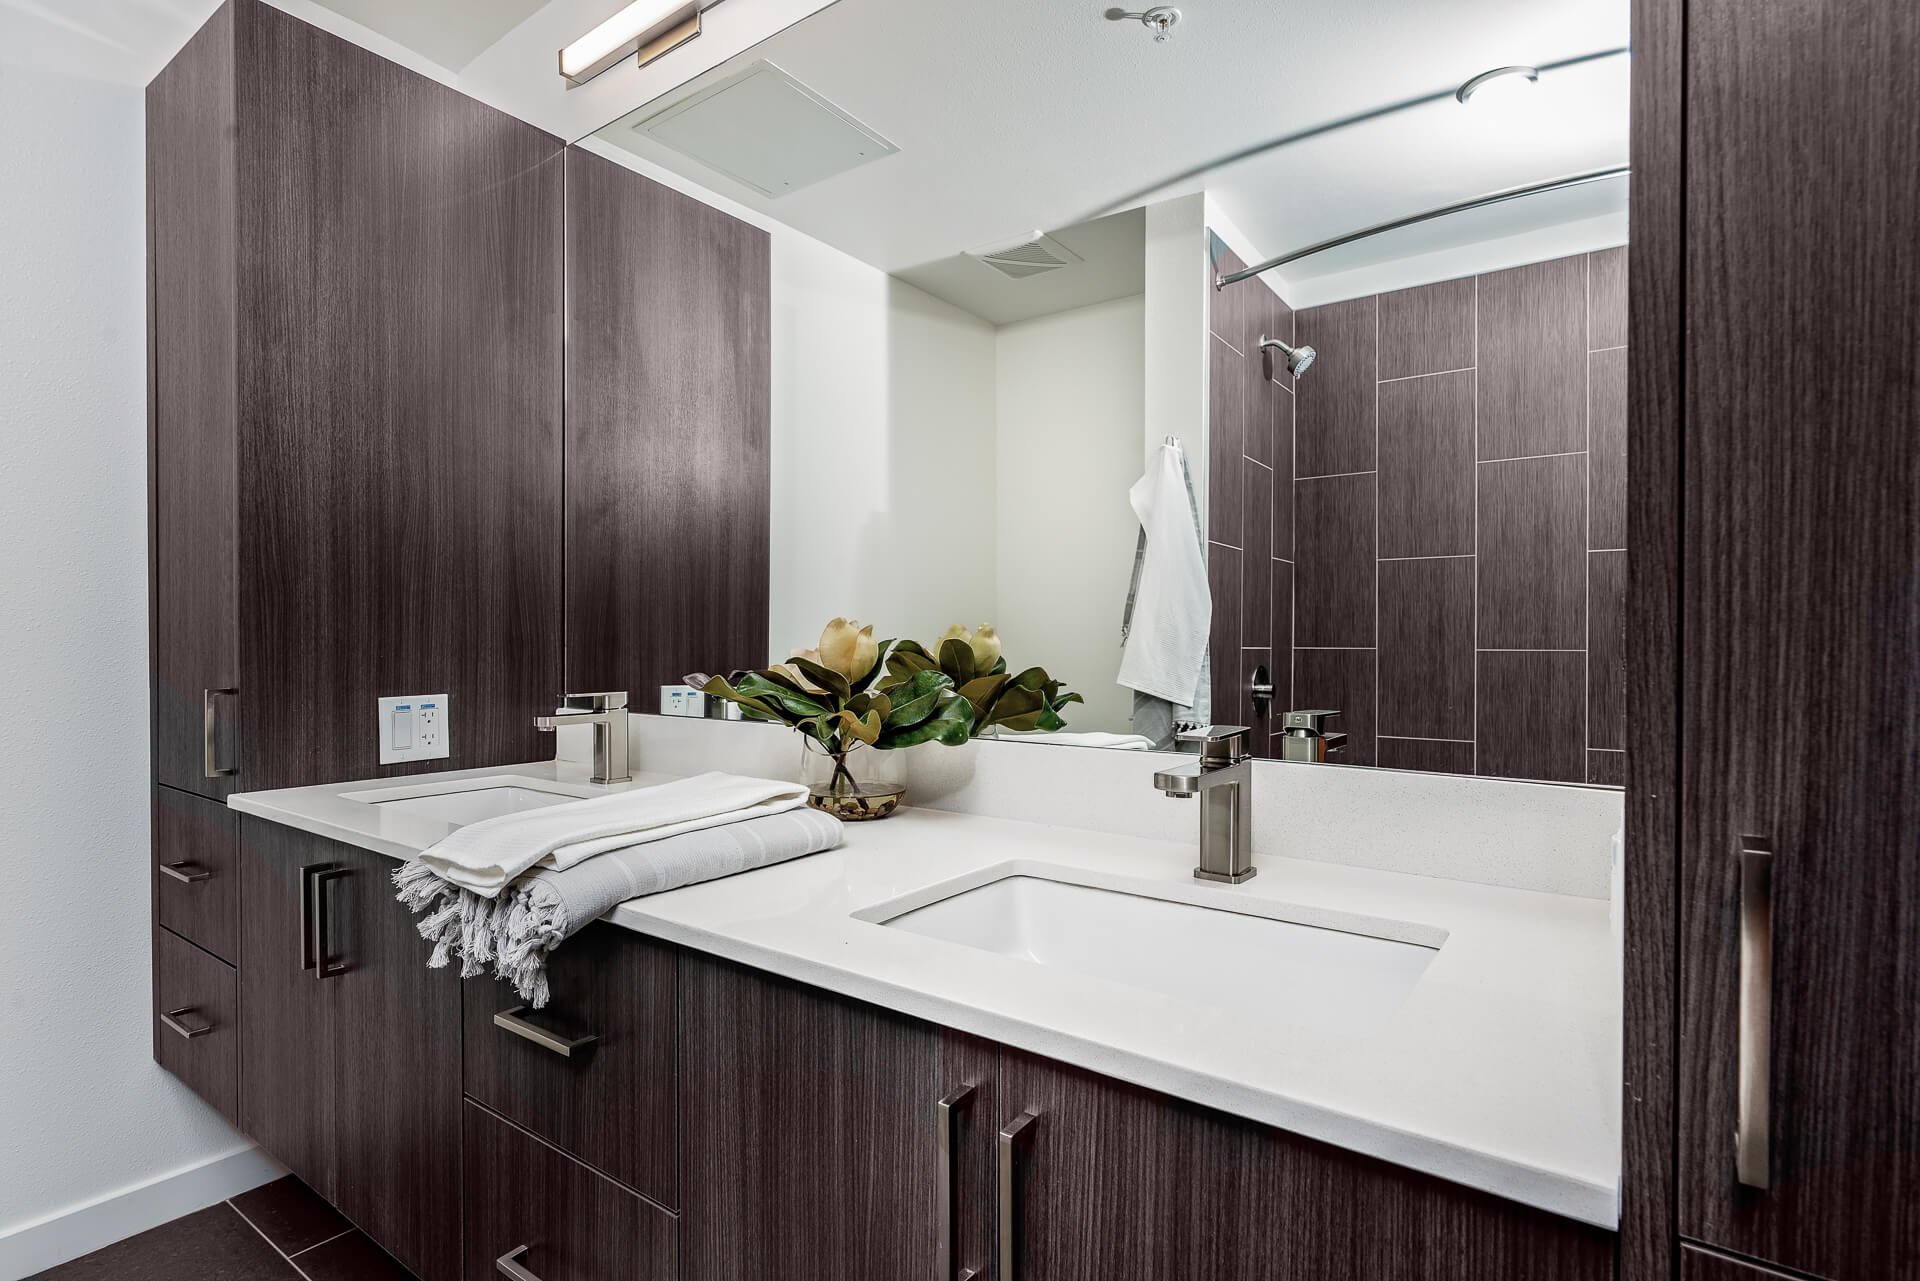 A bathroom featuring custom-built cabinetry, a double sink, and stunning lighting fixtures.